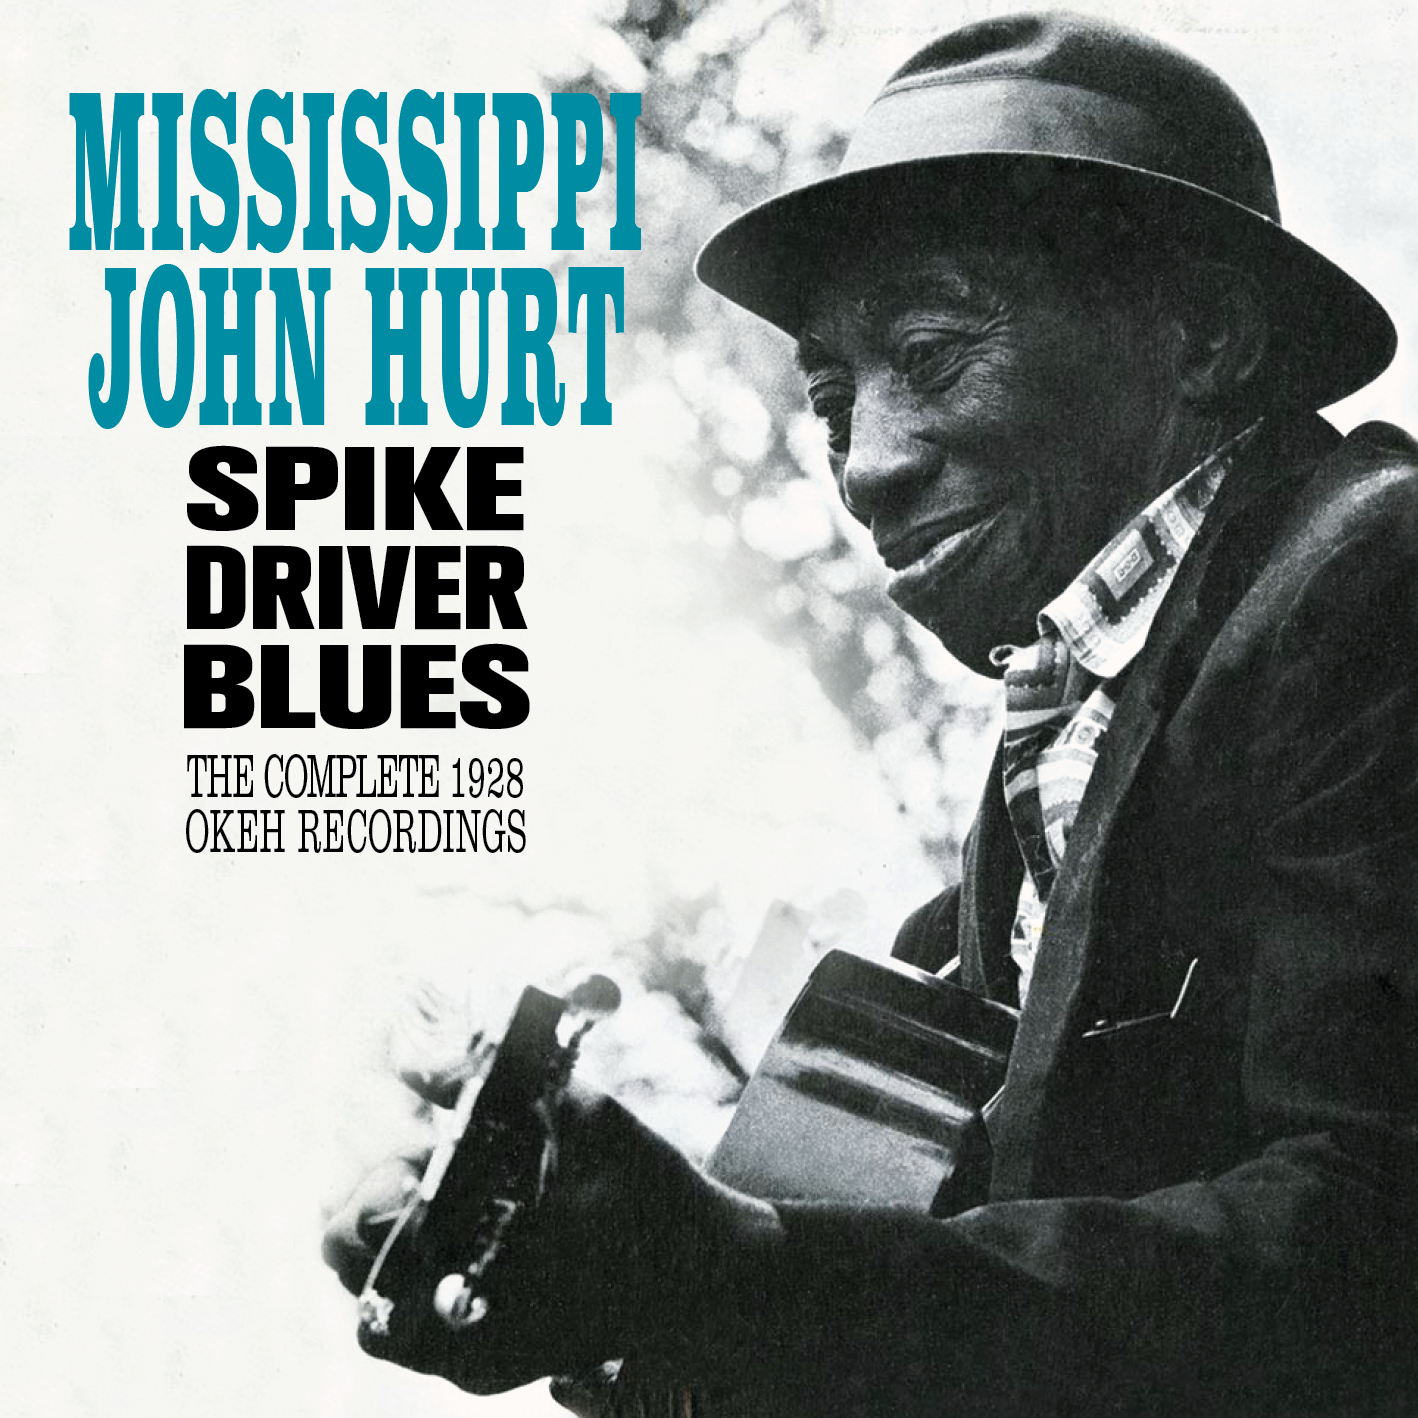 SPIKE DRIVER BLUES - THE COMPLETE 1928 OKEH RECORDINGS